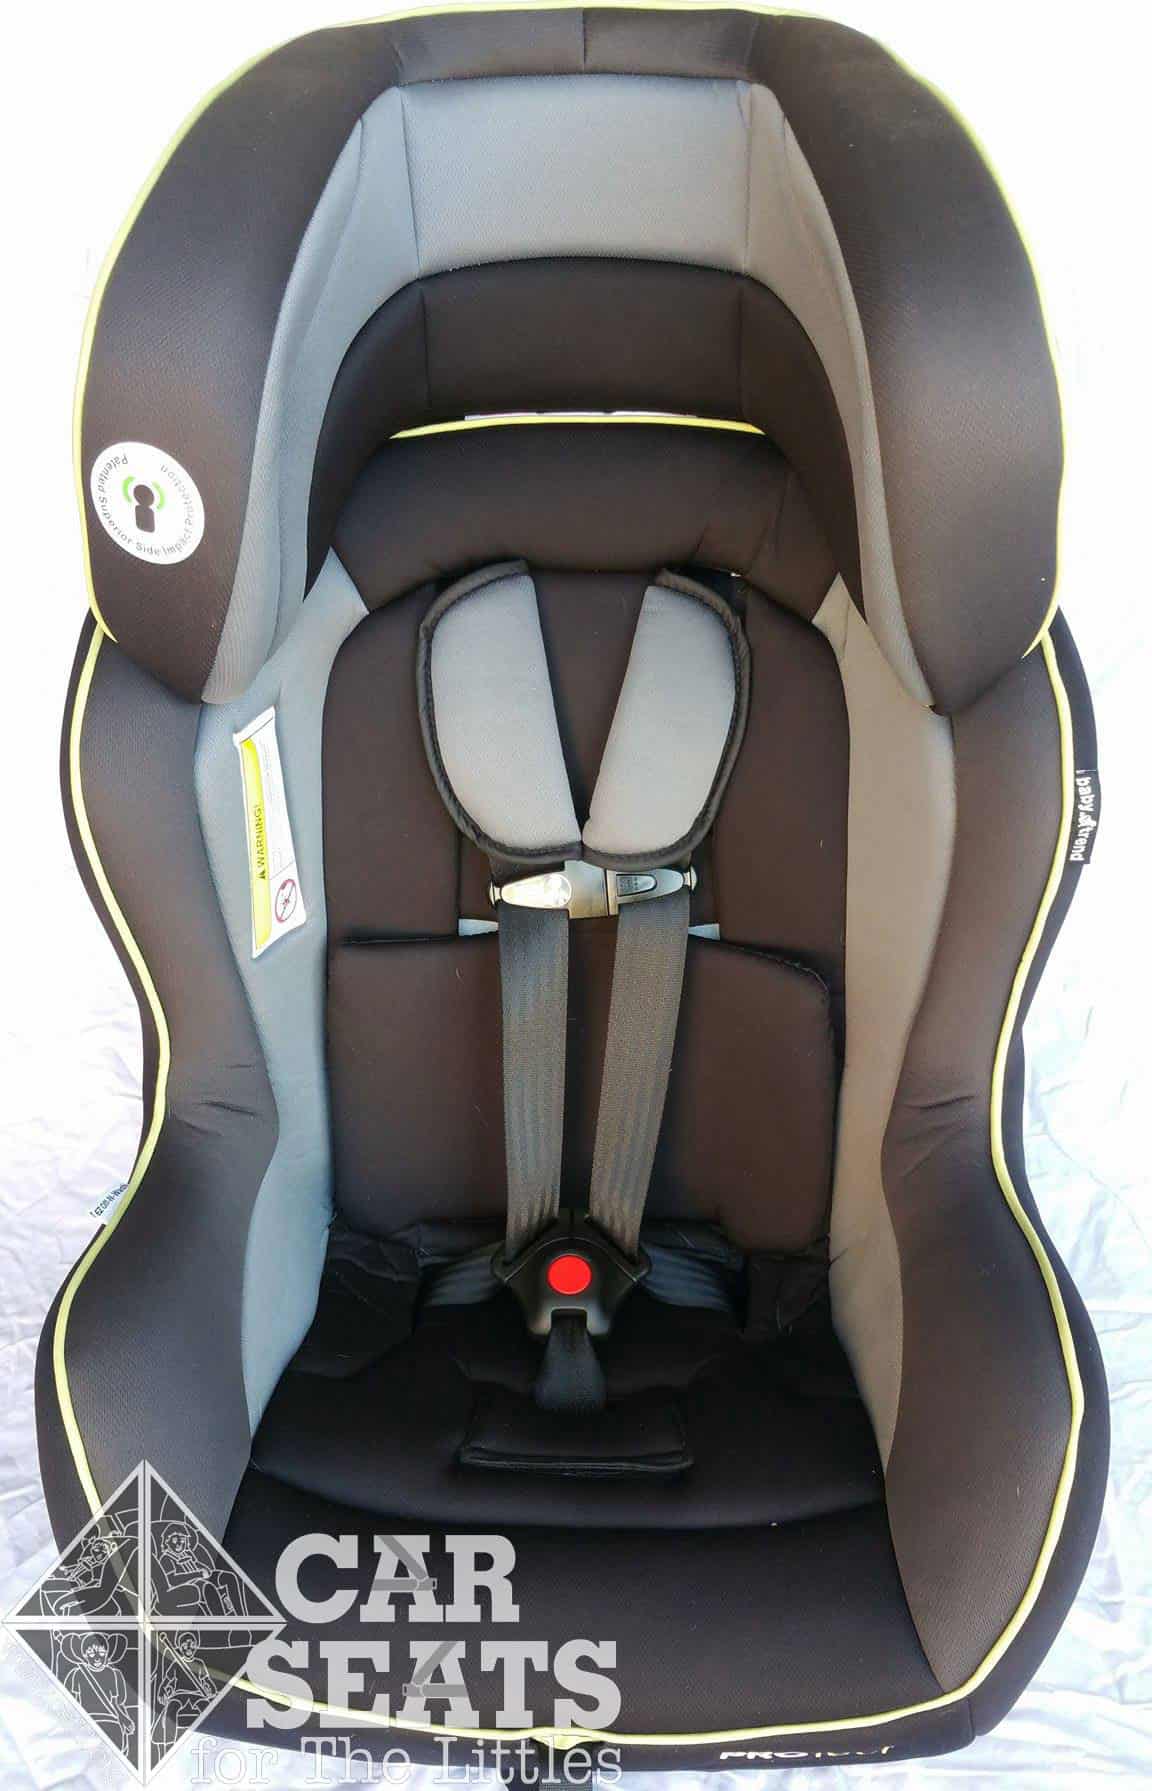 Baby Trend Protect Sport Convertible Car Seat Review Seats For The Littles - Is Baby Trend A Safe Car Seat